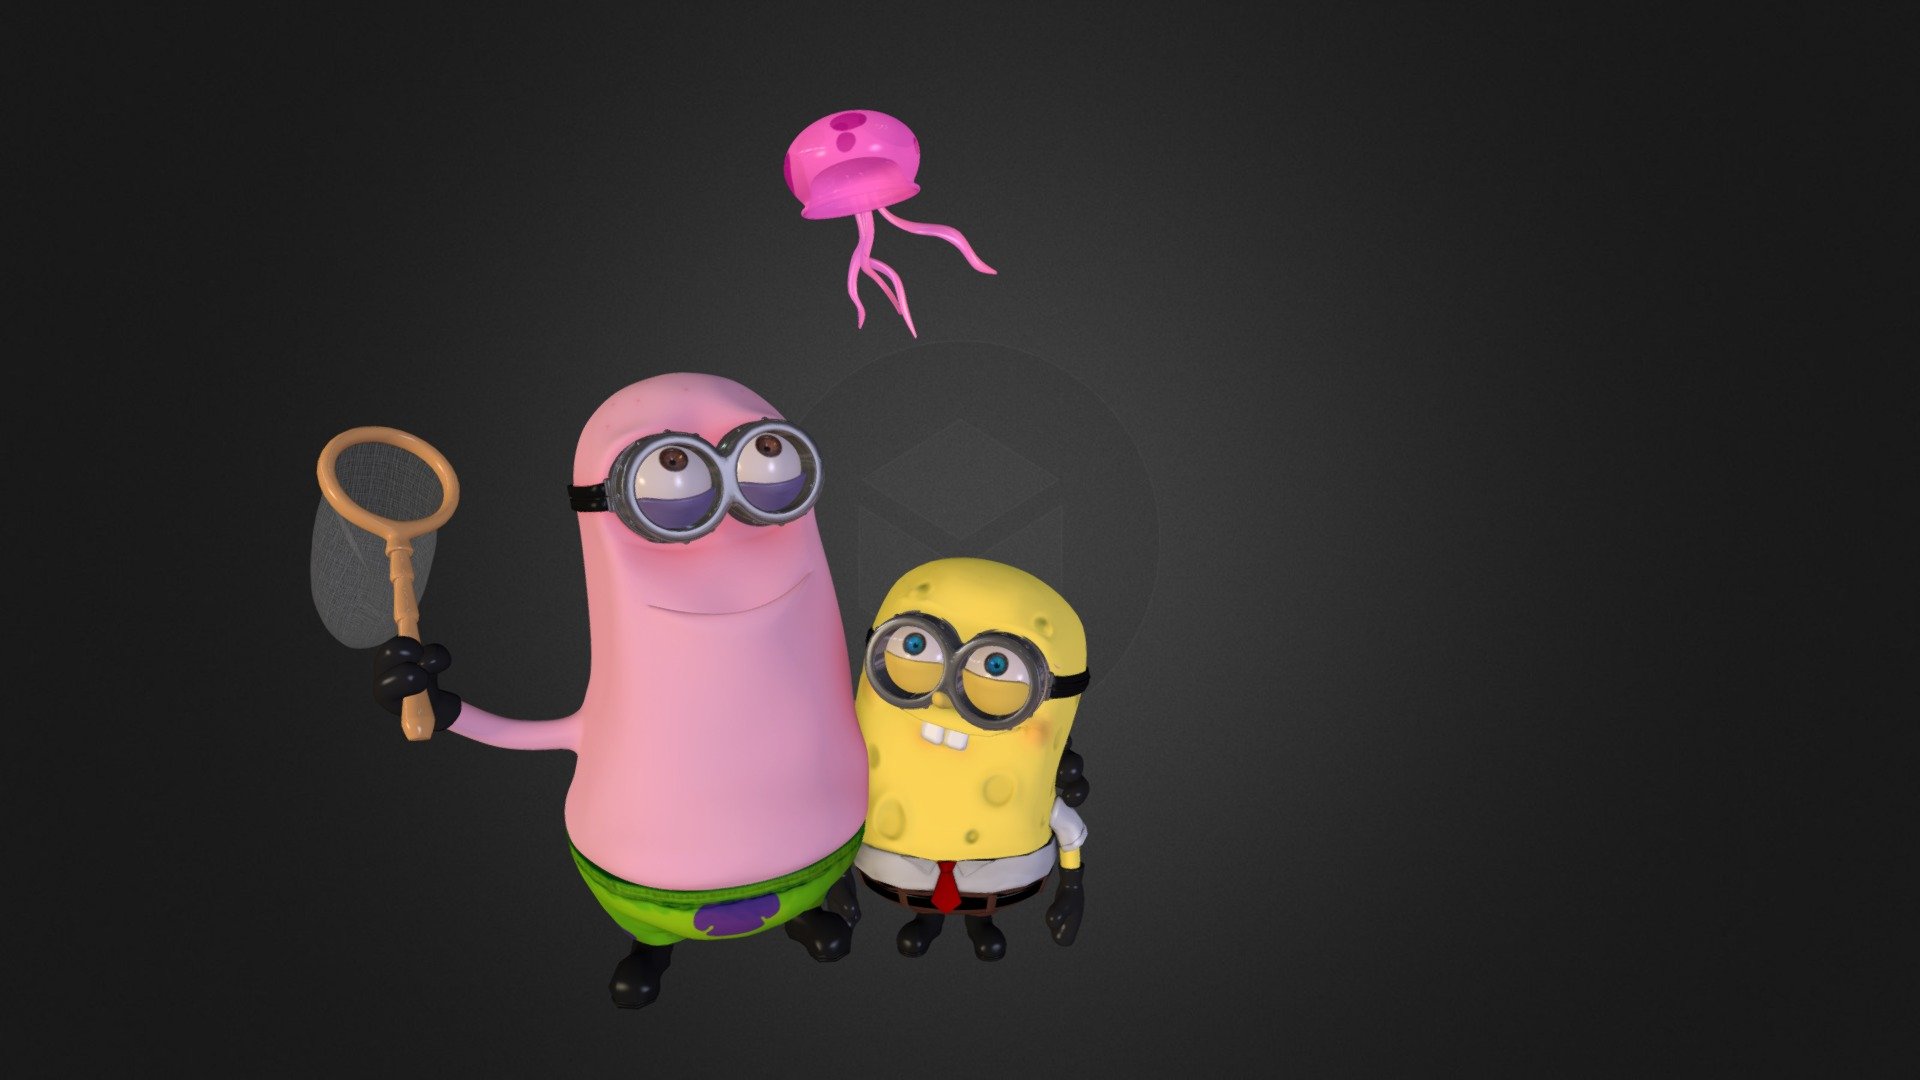 Have you ever imagine your favorite cartoon characters combined?
I love patrick star and spongebob series, it made all my childhood.

and here comes the minion challenge back in 2012/2013,  I totally forgot. an here's 2020, time flies.

so i combined those two to full fill my fantasy. 
LOL 

Oh, and I make this downloadable, so you can use this in any project you got 3d model